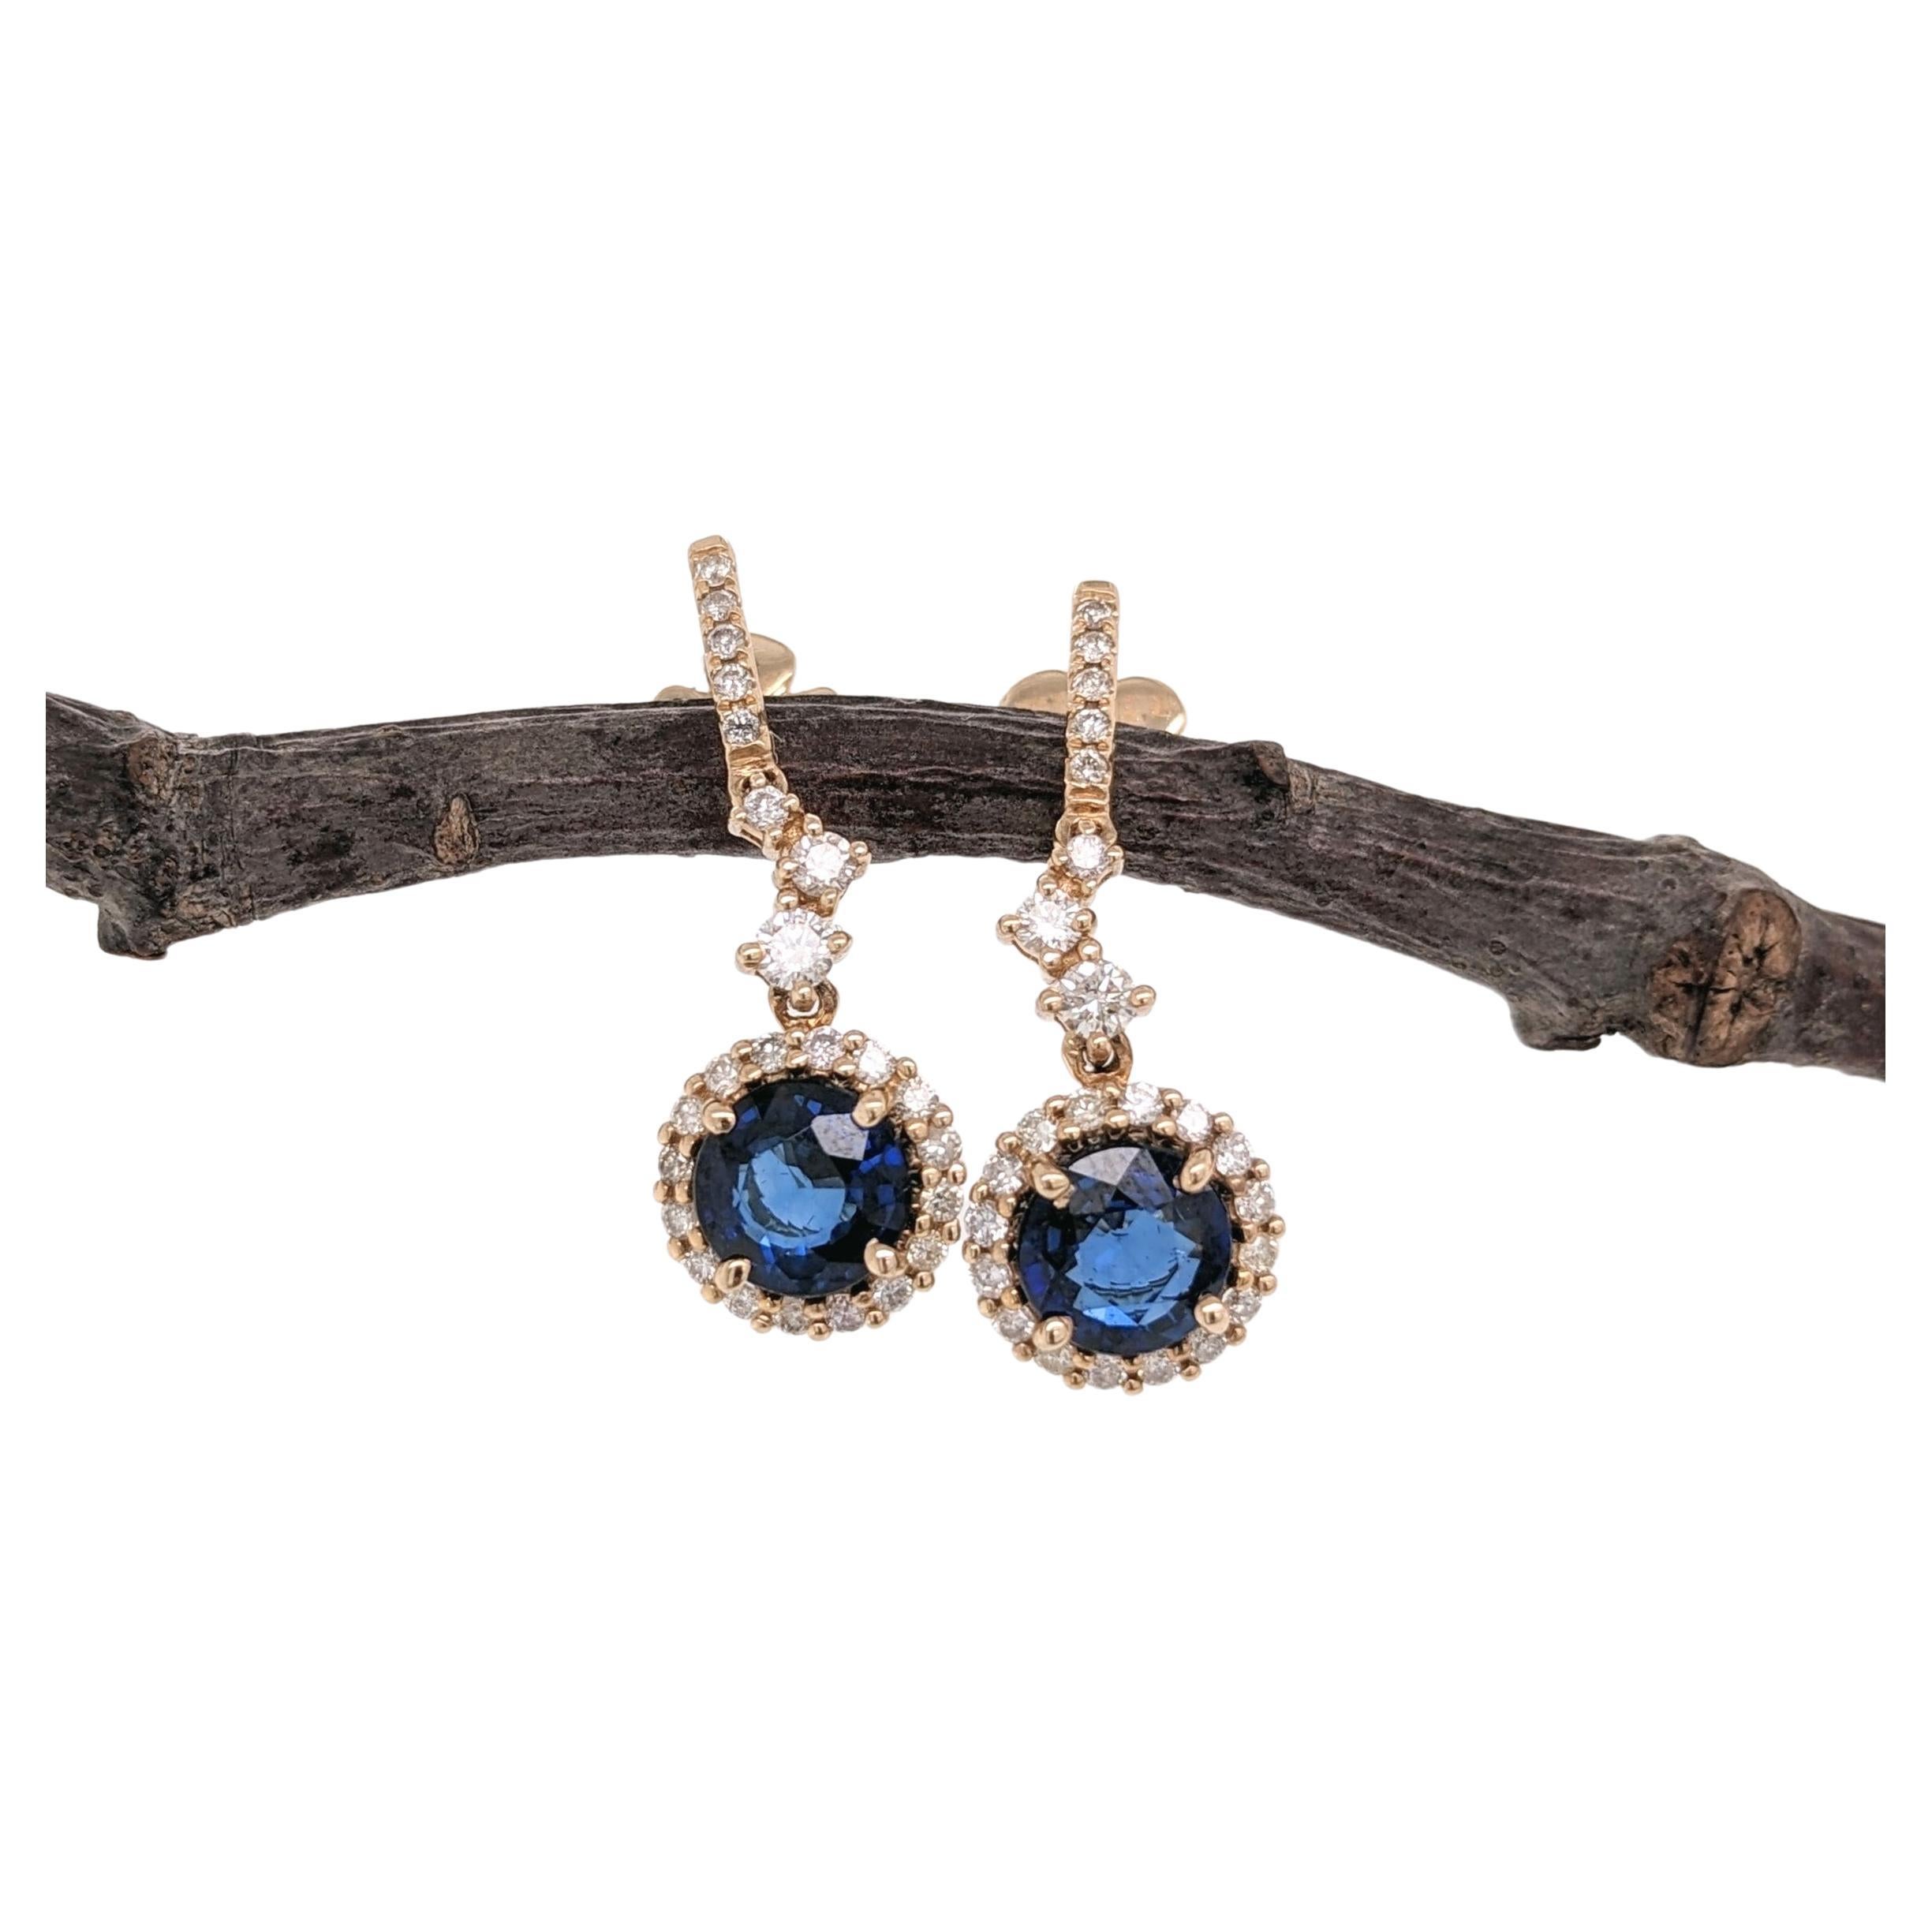 1.77 cts Blue Sapphire Dangle Earrings in 14K Gold w Diamond Accents Round 6mm